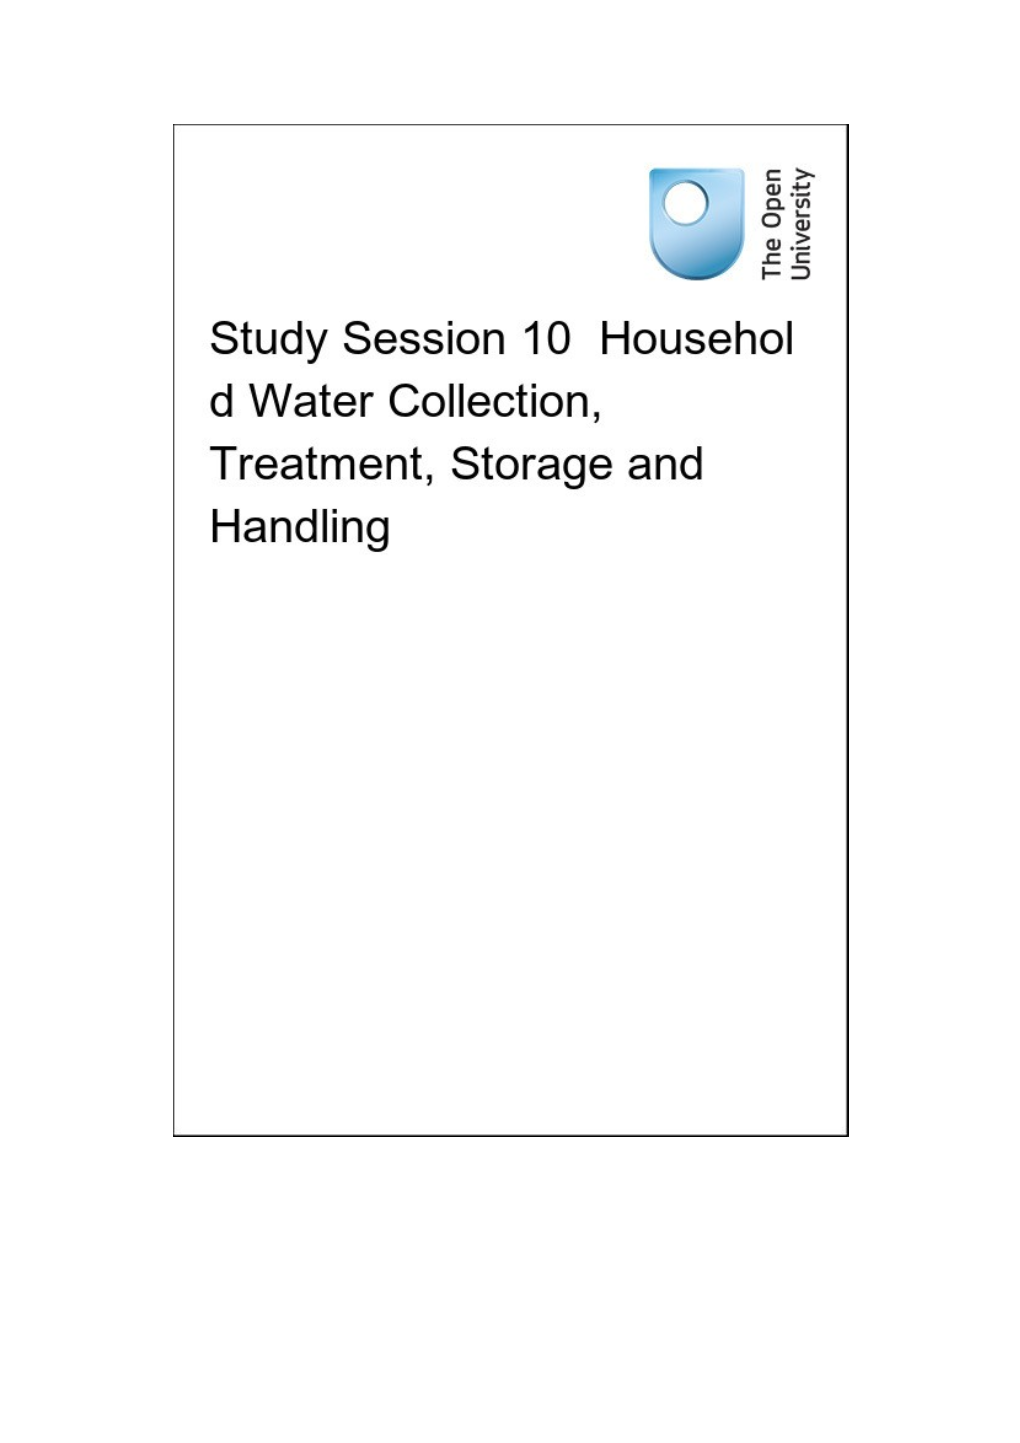 Study Session 10 Household Water Collection, Treatment, Storage and Handling